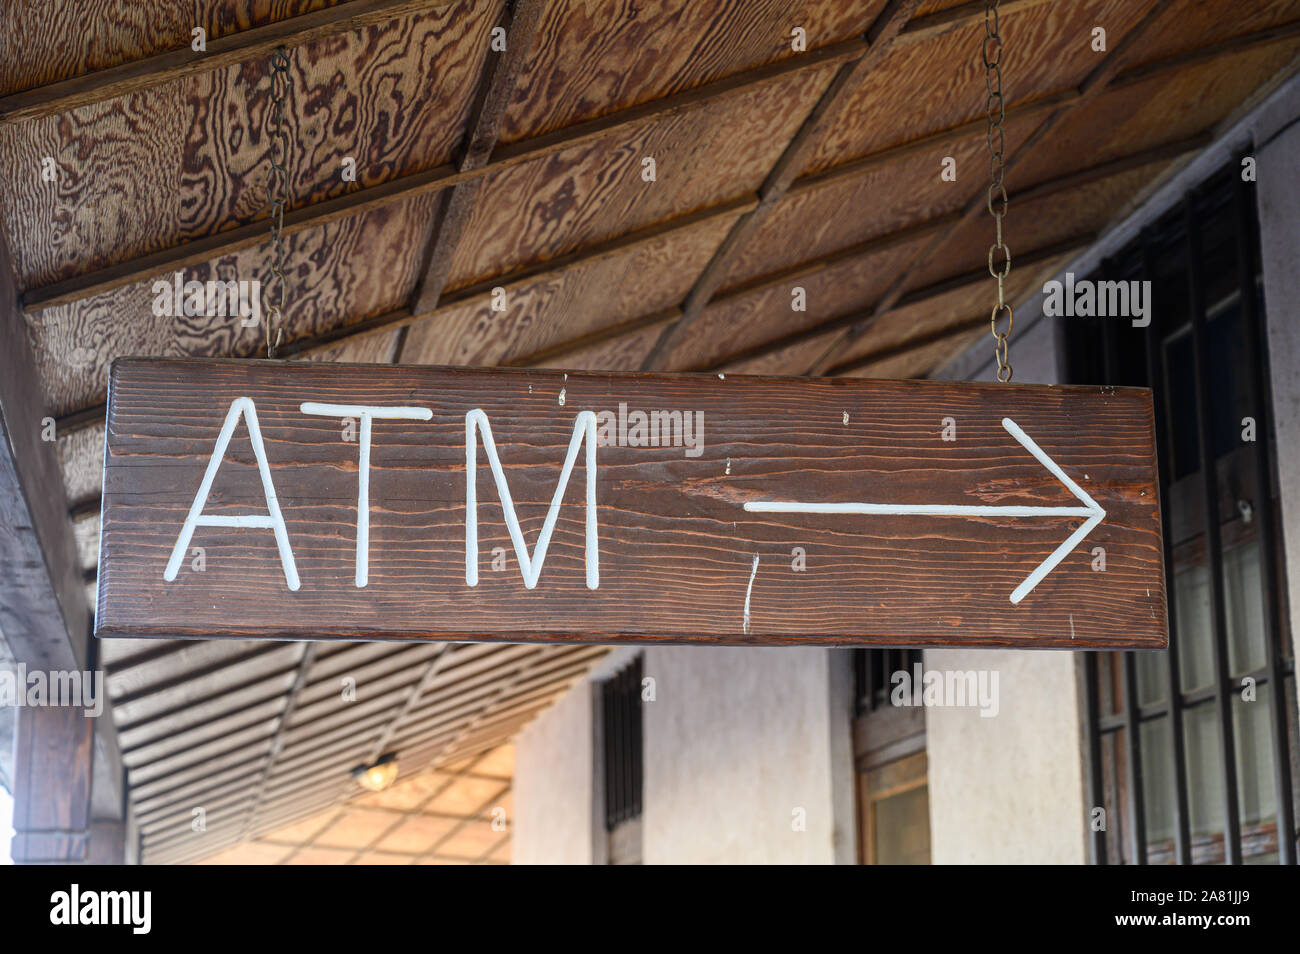 A wooden sign points to an ATM machine Stock Photo